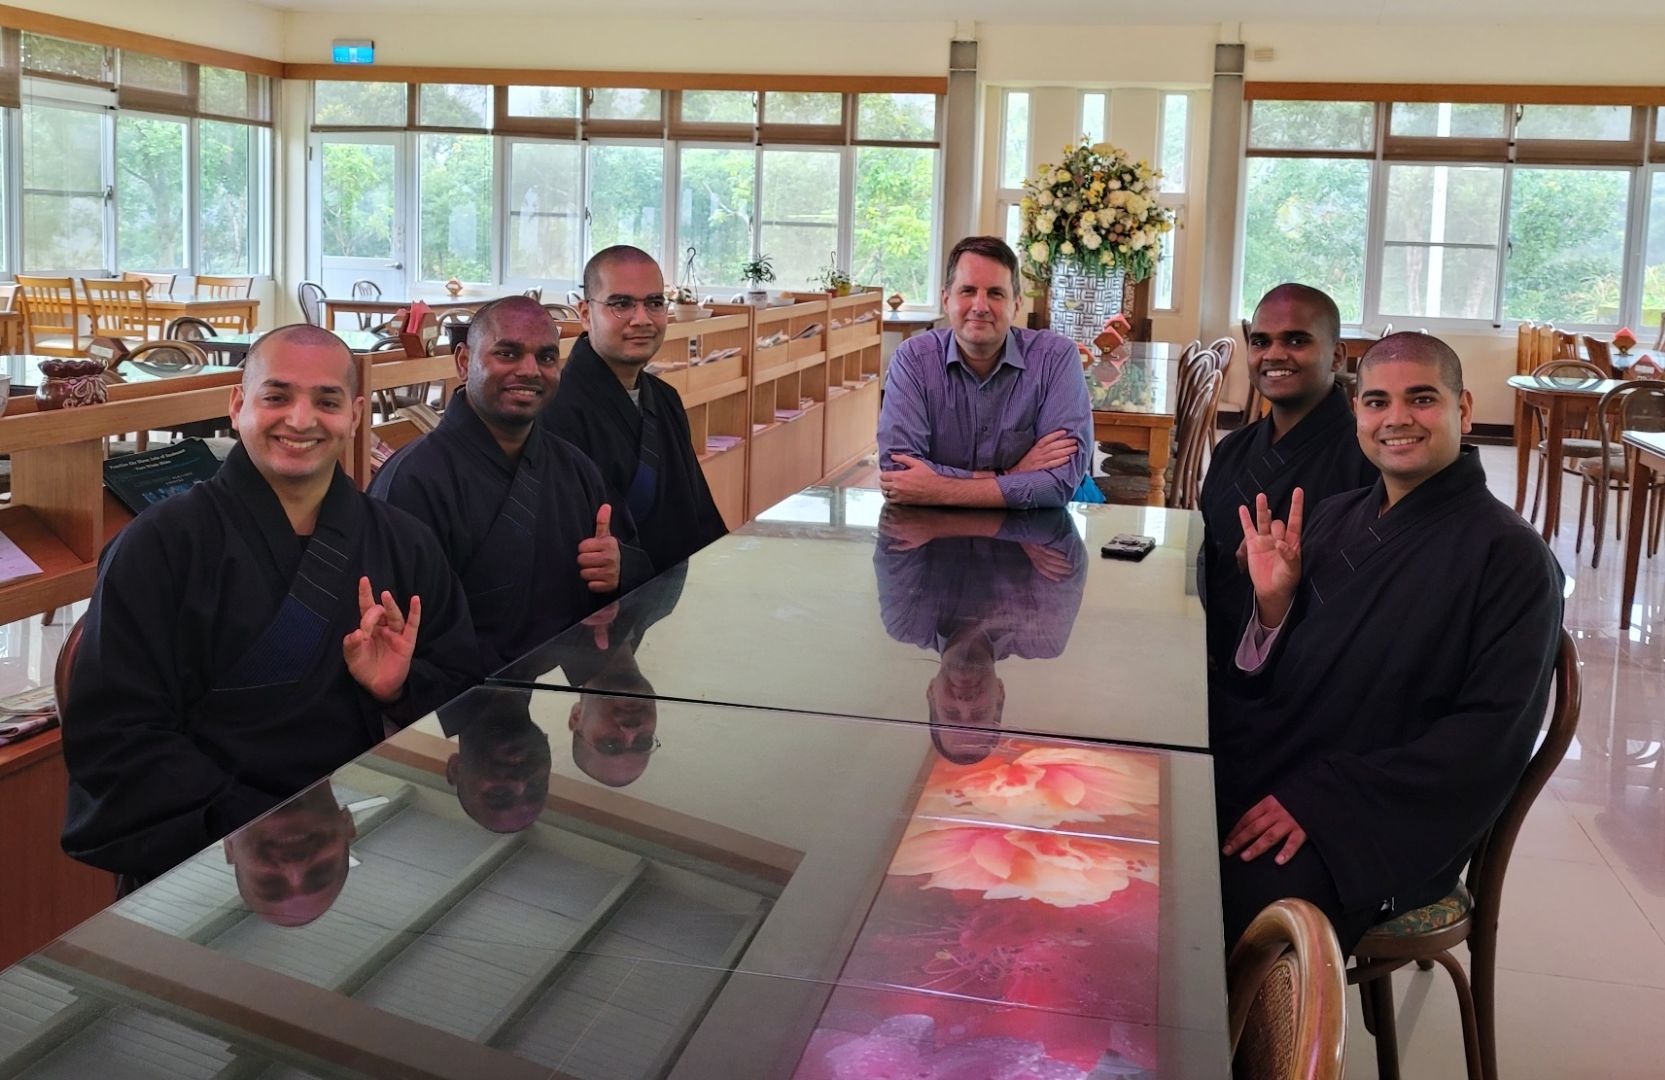 A group of six men sit at a long, reflective table. At left are three men dressed in black Buddhist attire, smiling and gesturing at the camera, a man in a blue shirt in the center crosses his arms, and two men also dressed in black smile and gesture at the camera. A row of windows is in the background.